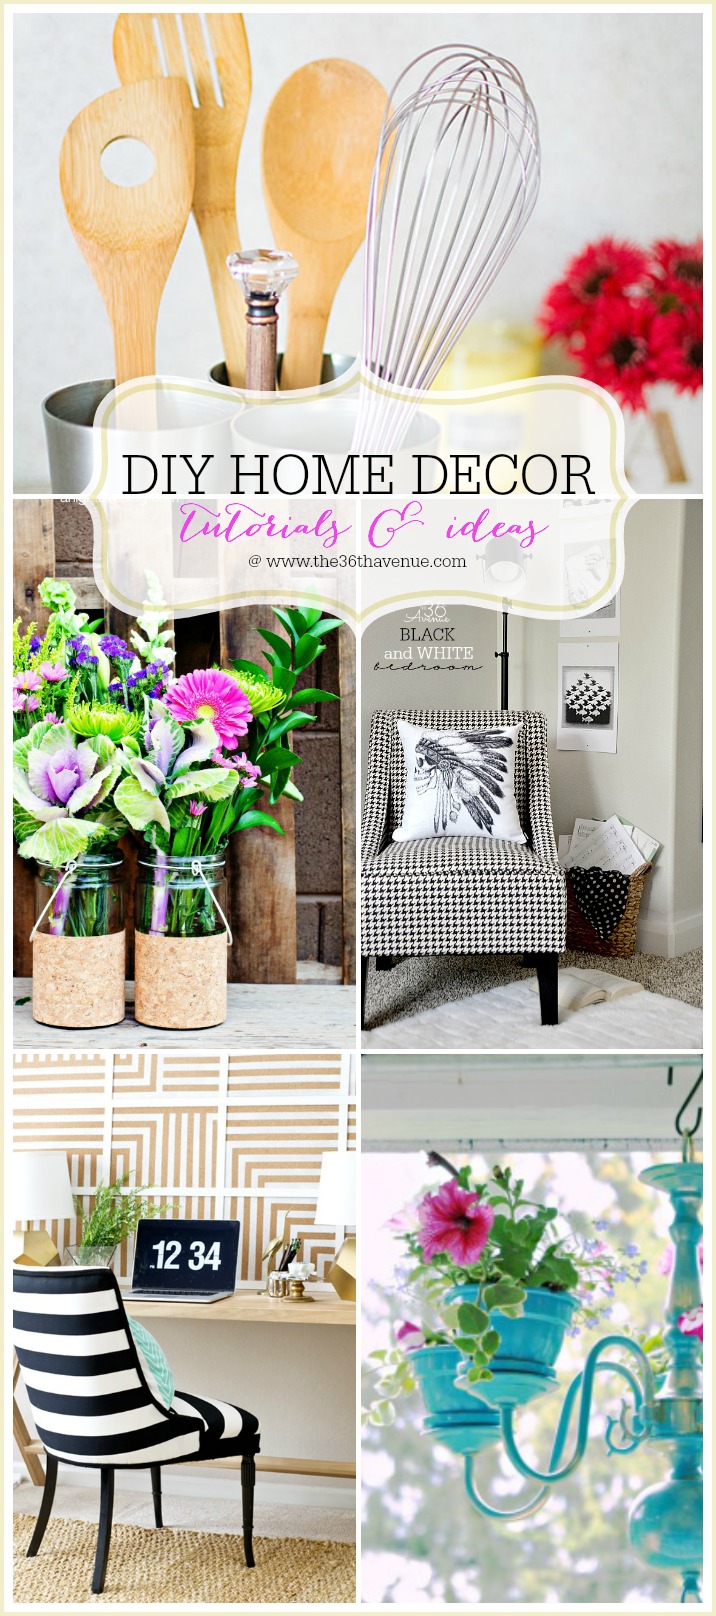 Home Decor DIY Projects | The 36th AVENUE